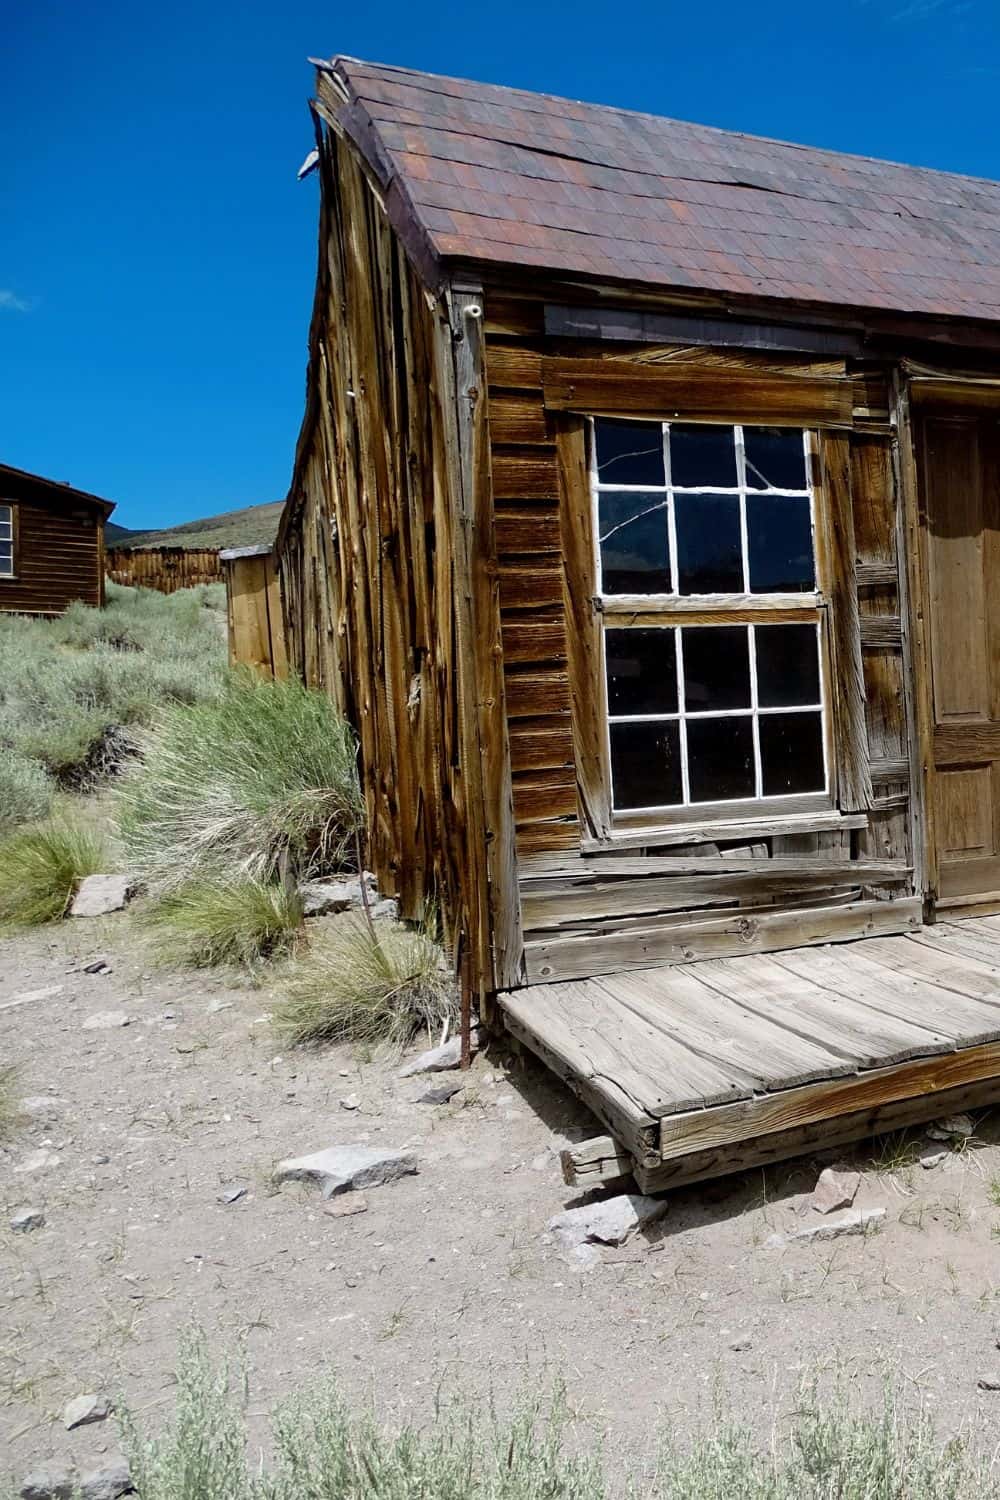 The History Of Bodie California